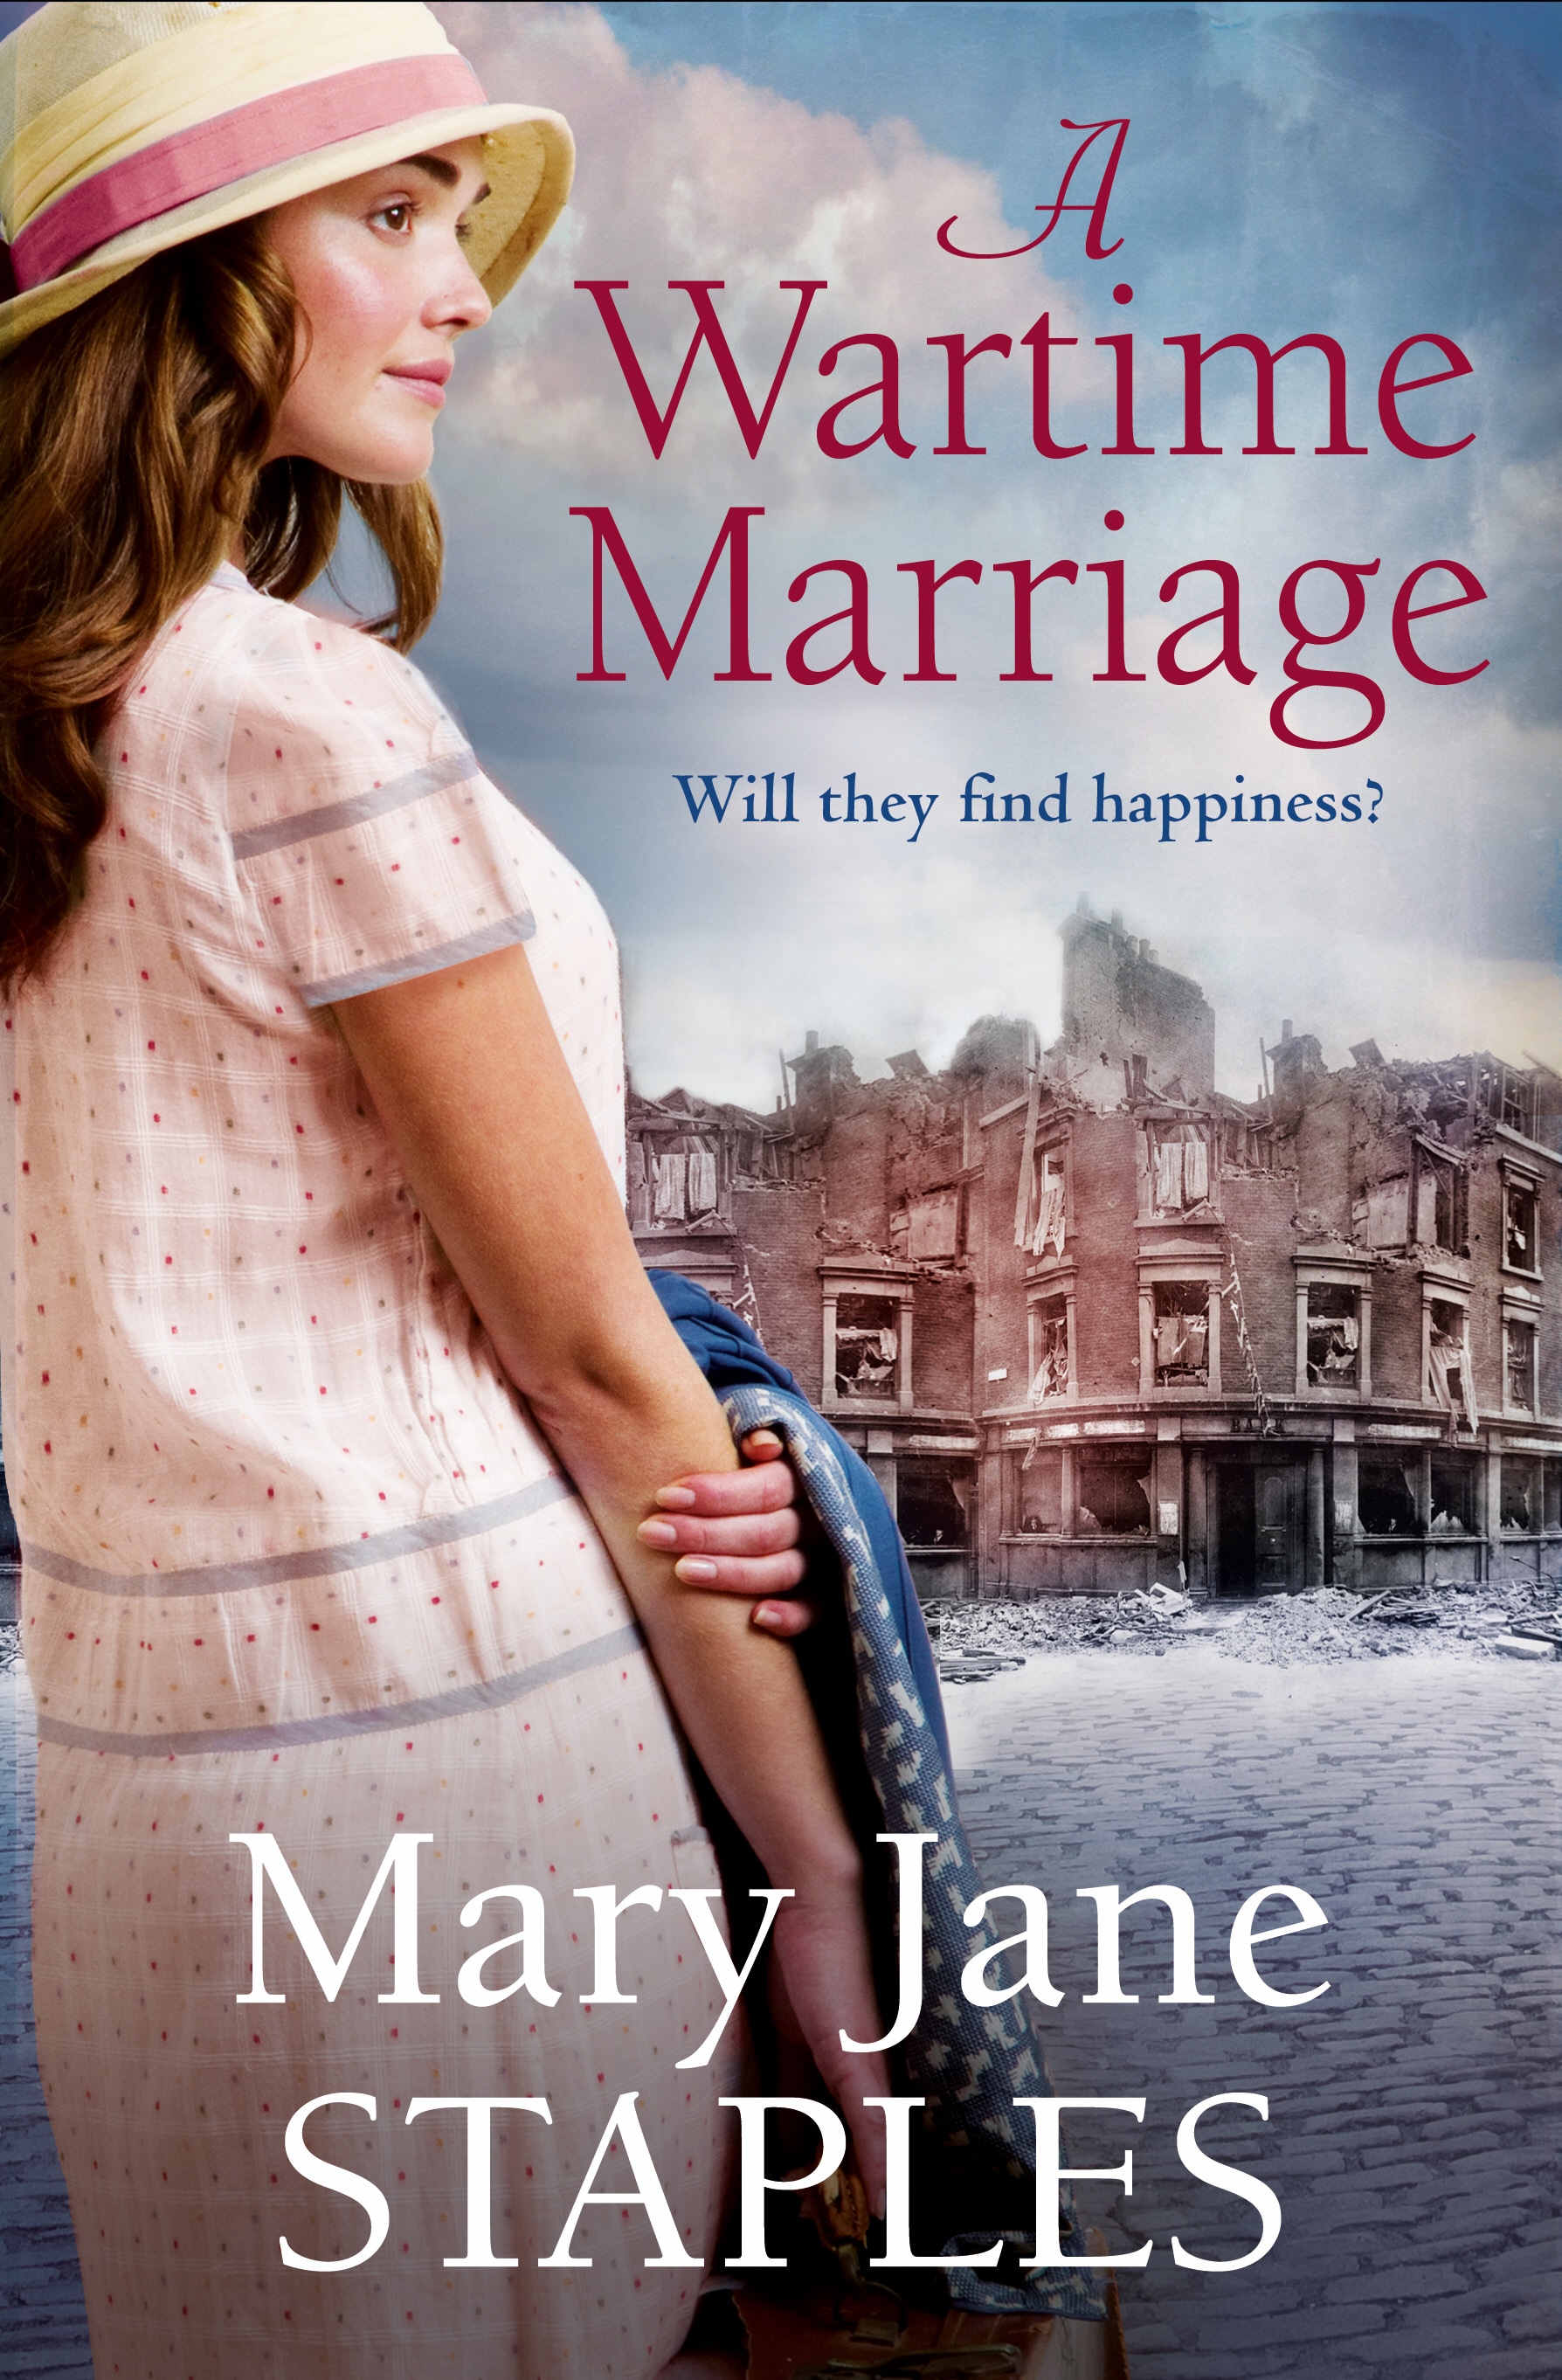 Book “A Wartime Marriage” by Mary Jane Staples — August 20, 2020